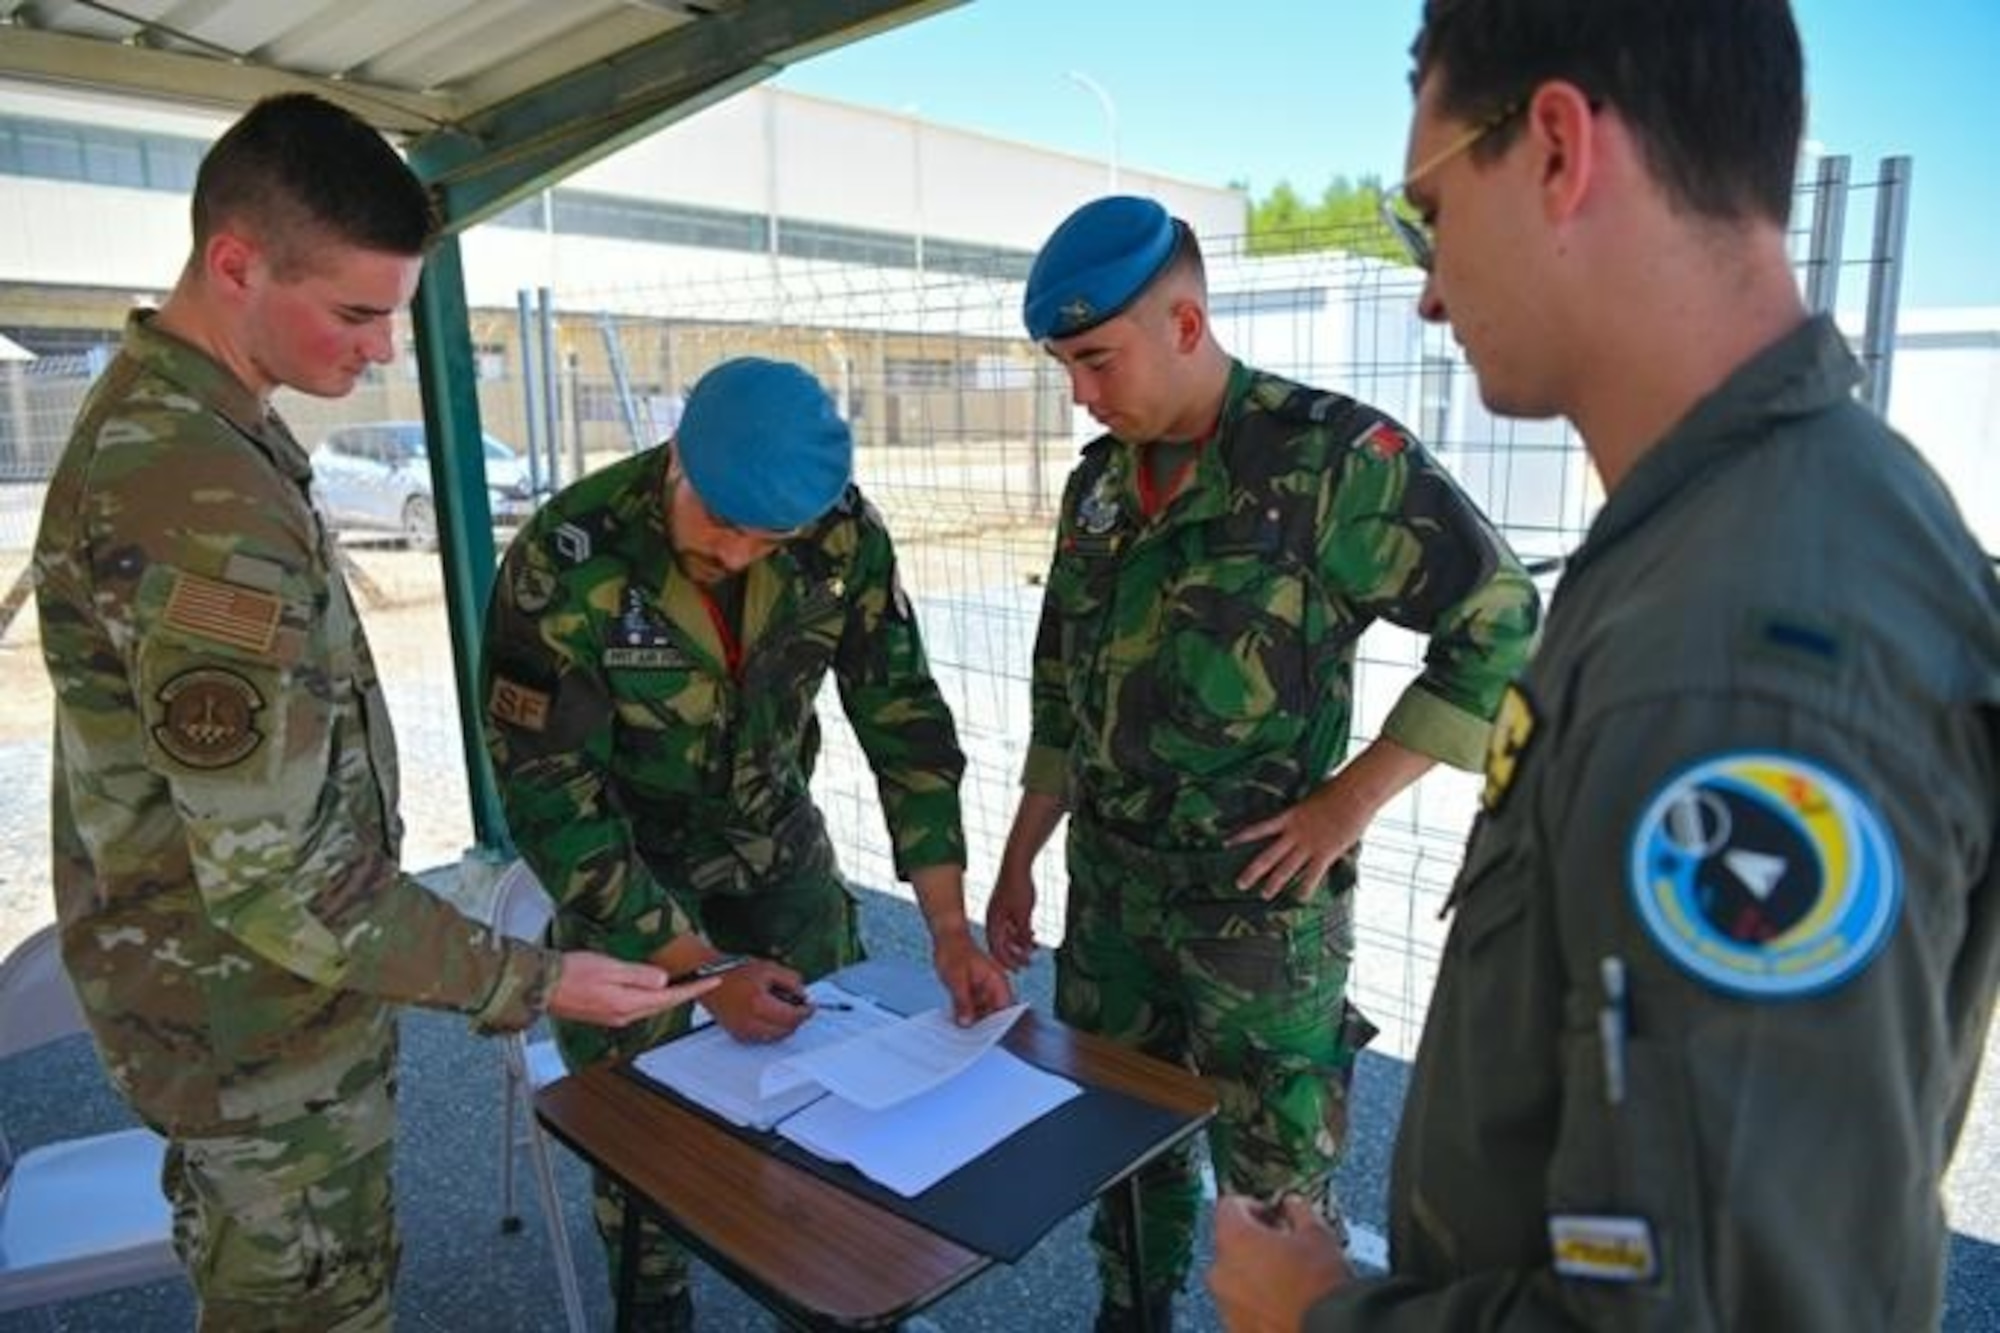 U.S. Air Force Airman 1st Class Stone Miller, 52nd Security Forces Squadron patrolman (left), stationed at Spangdahlem Air Base, Germany, works with air police from the Portuguese air force to check the entrance clearances at Exercise Real Thaw 22 on Beja Air Base, Portugal, July 6, 2022. Working alongside Allies allows our forces the capability to adapt to today’s complex security environment and ensures the defensive power of NATO remains unmatched. (U.S. Air Force photo by Tech. Sgt. Warren D. Spearman Jr.)